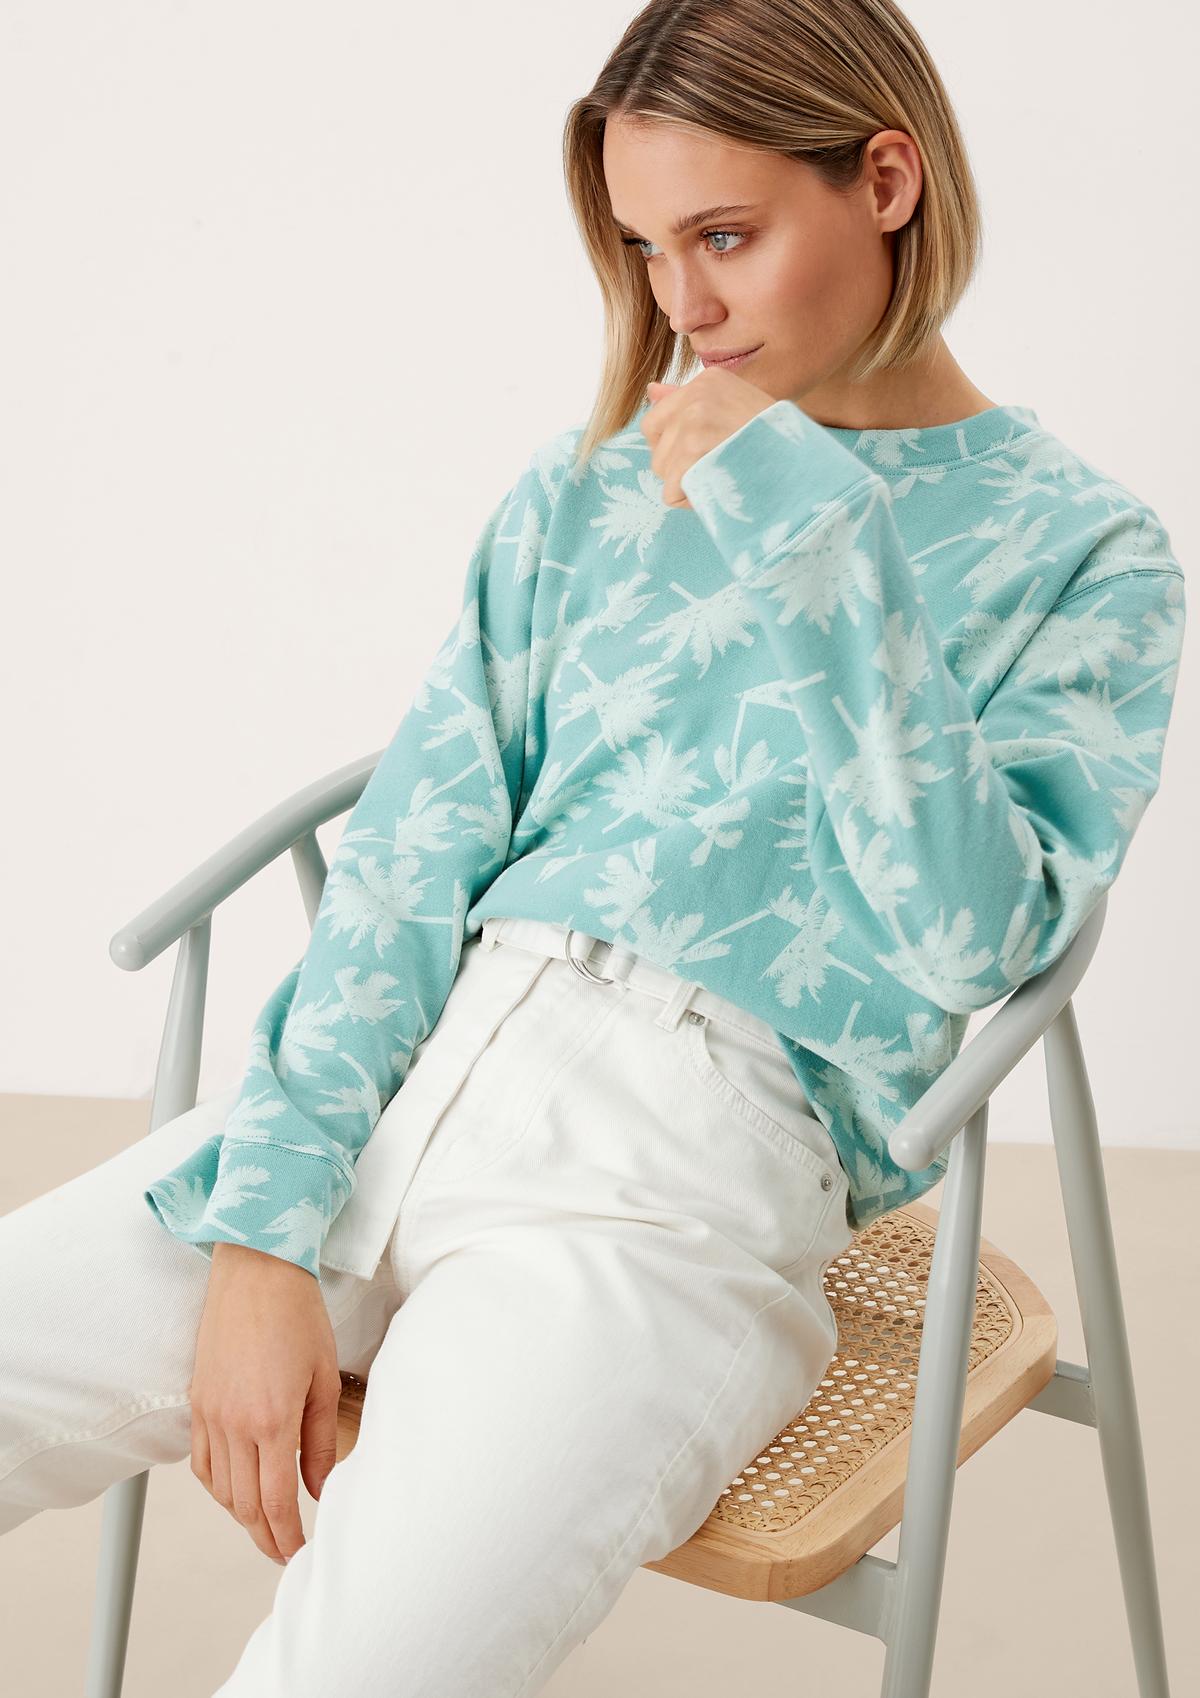 s.Oliver Sweatshirt with a stylish all-over print